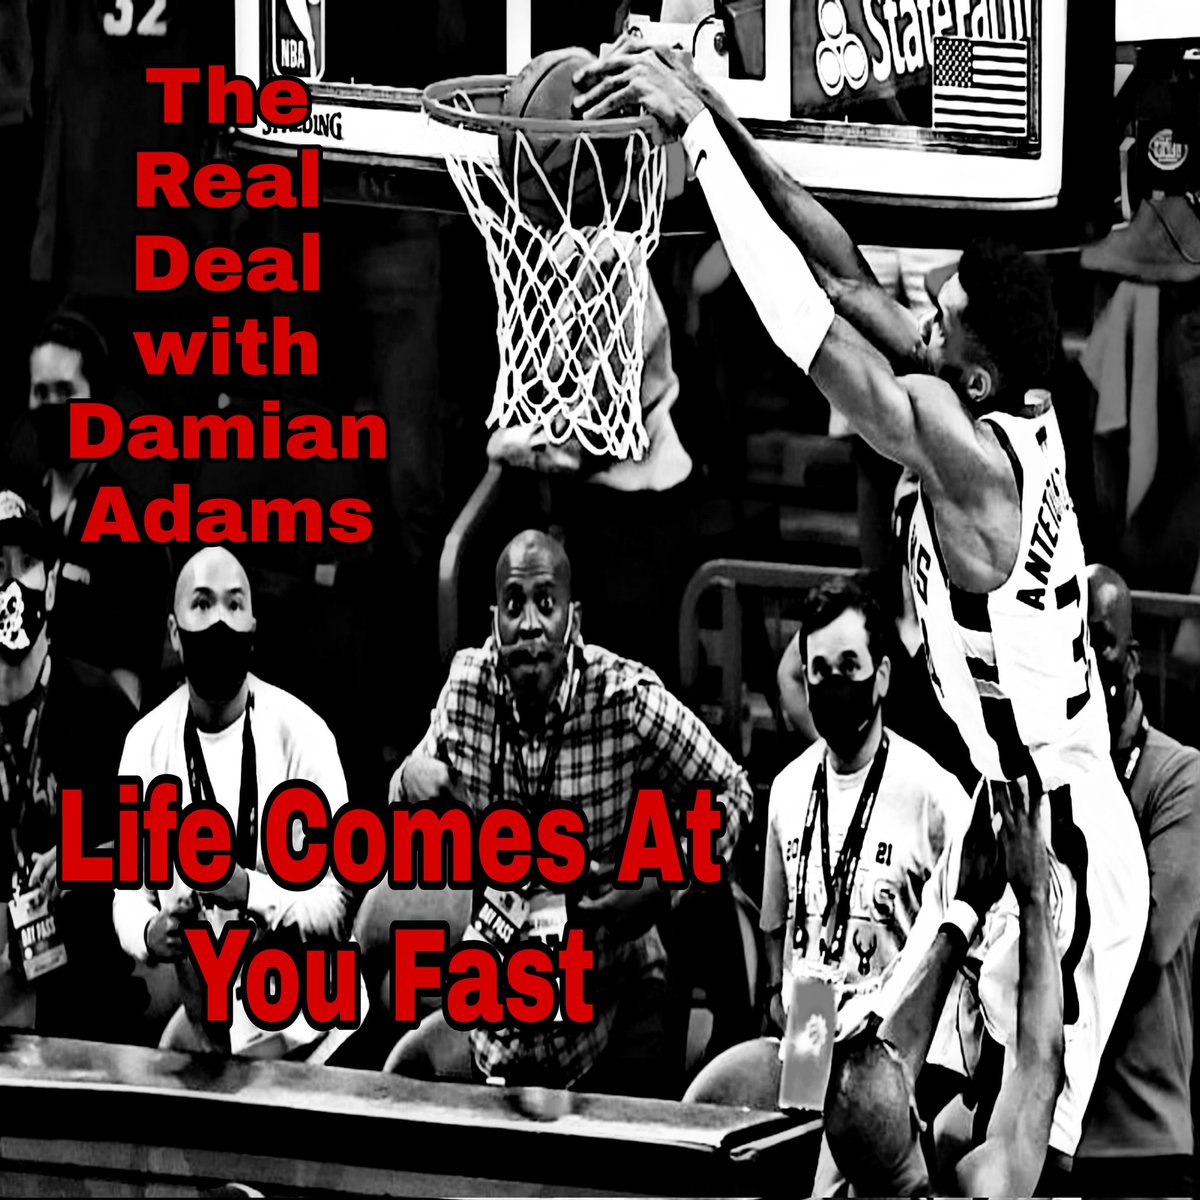 New EP: Life Comes At You Fast
#Podcast #Listen #Subscribe

- How did #Bucks turn around #NBAFinals ?
- Review of #SpaceJam 
- Recap #CharloCastano
- Top 10 Fantasy Football QBs

Apple Podcast:
podcasts.apple.com/us/podcast/lif…

Spotify:
open.spotify.com/episode/0PL5hL…

#PodernFamily #Boxing #NFL